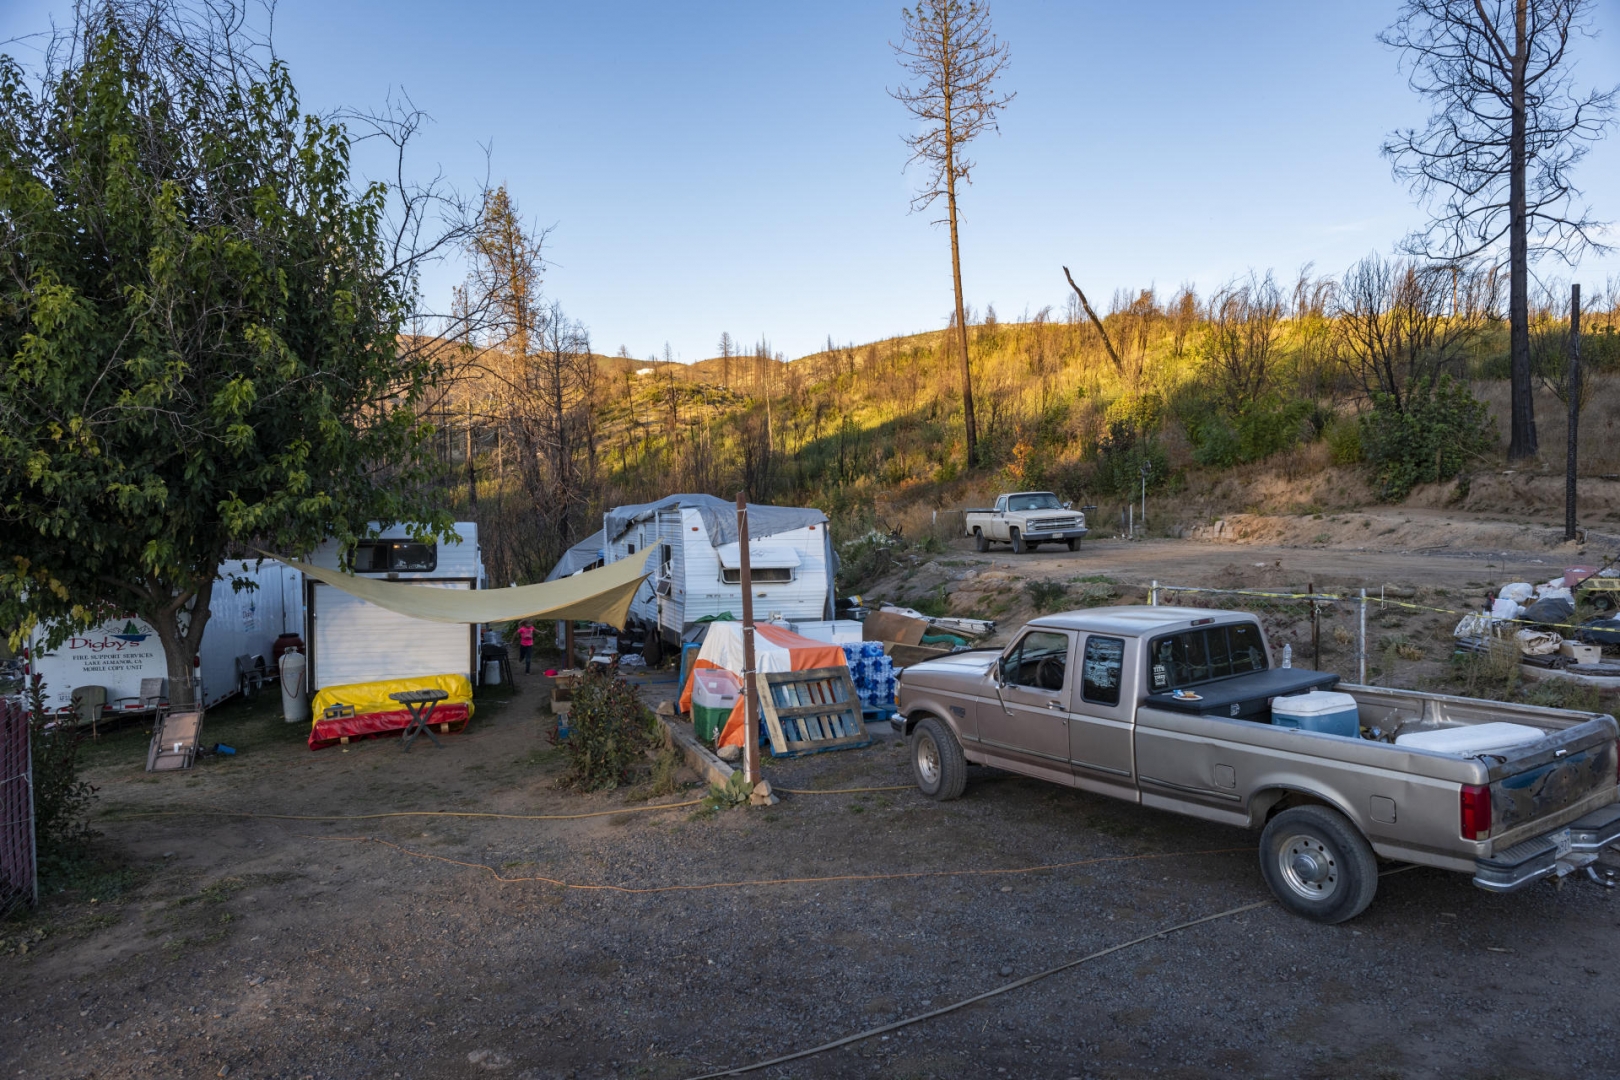 Vehicles and travel trailers occupy a yard.